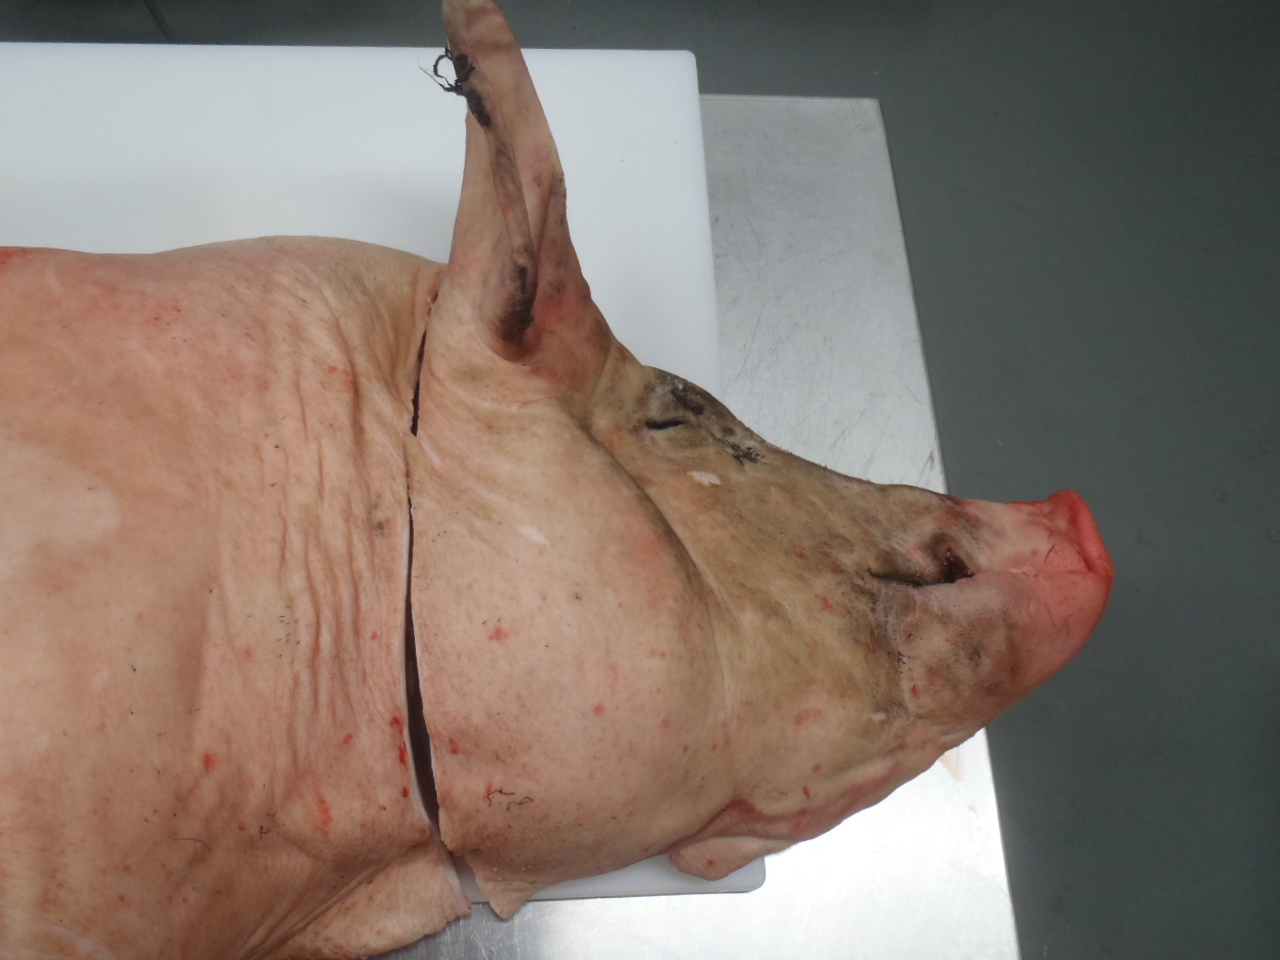 Cutting the head from the pig